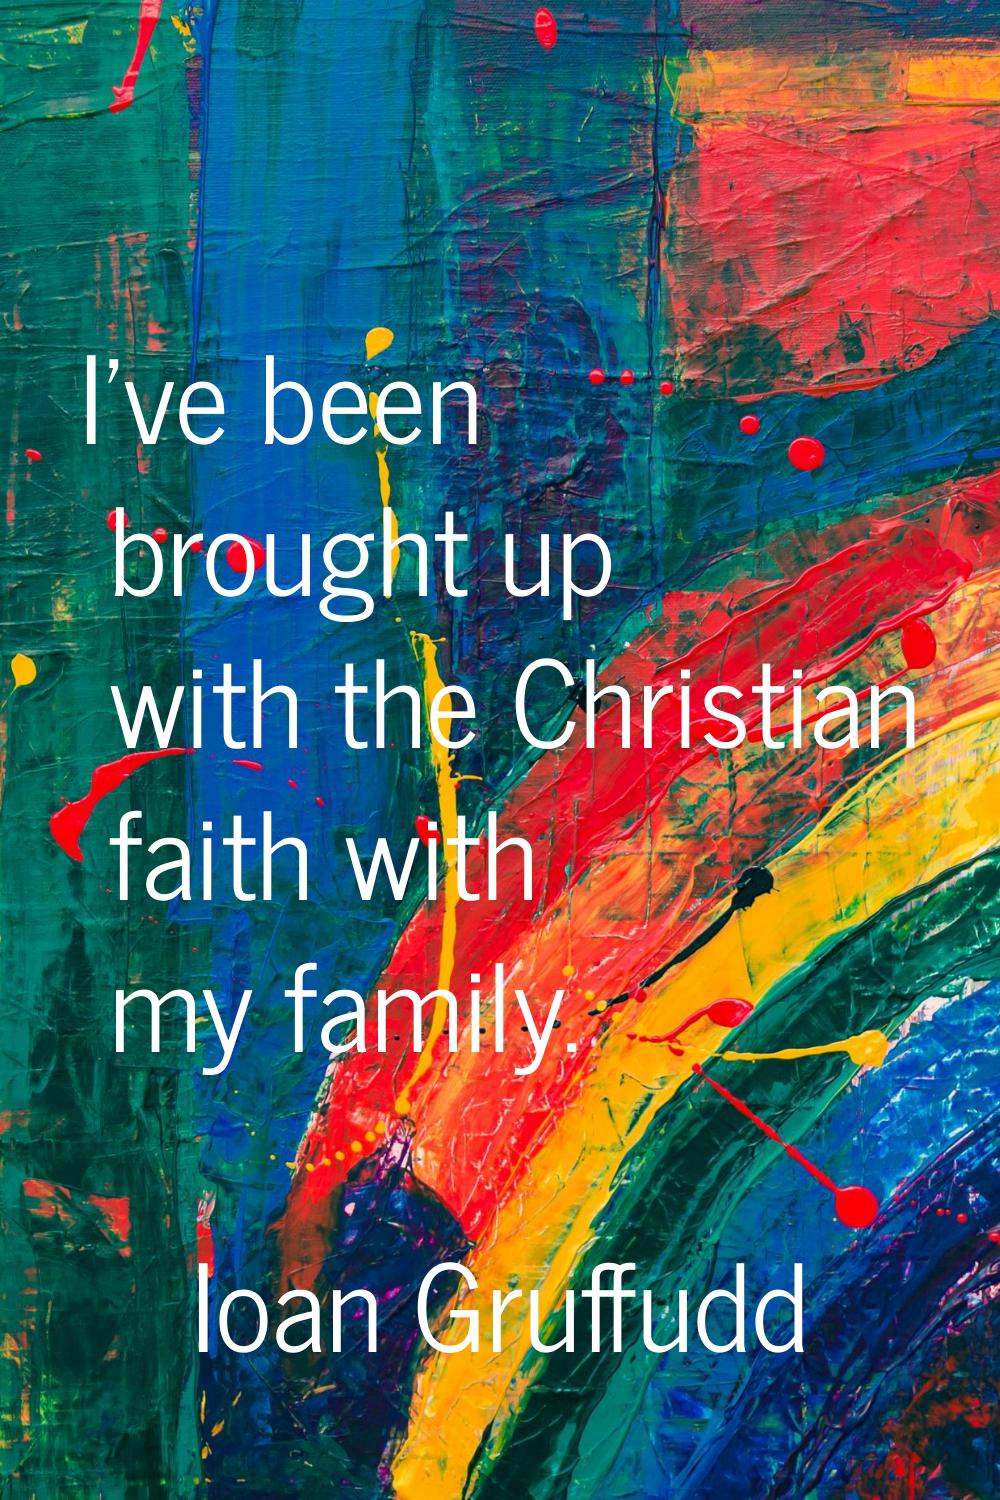 I've been brought up with the Christian faith with my family.